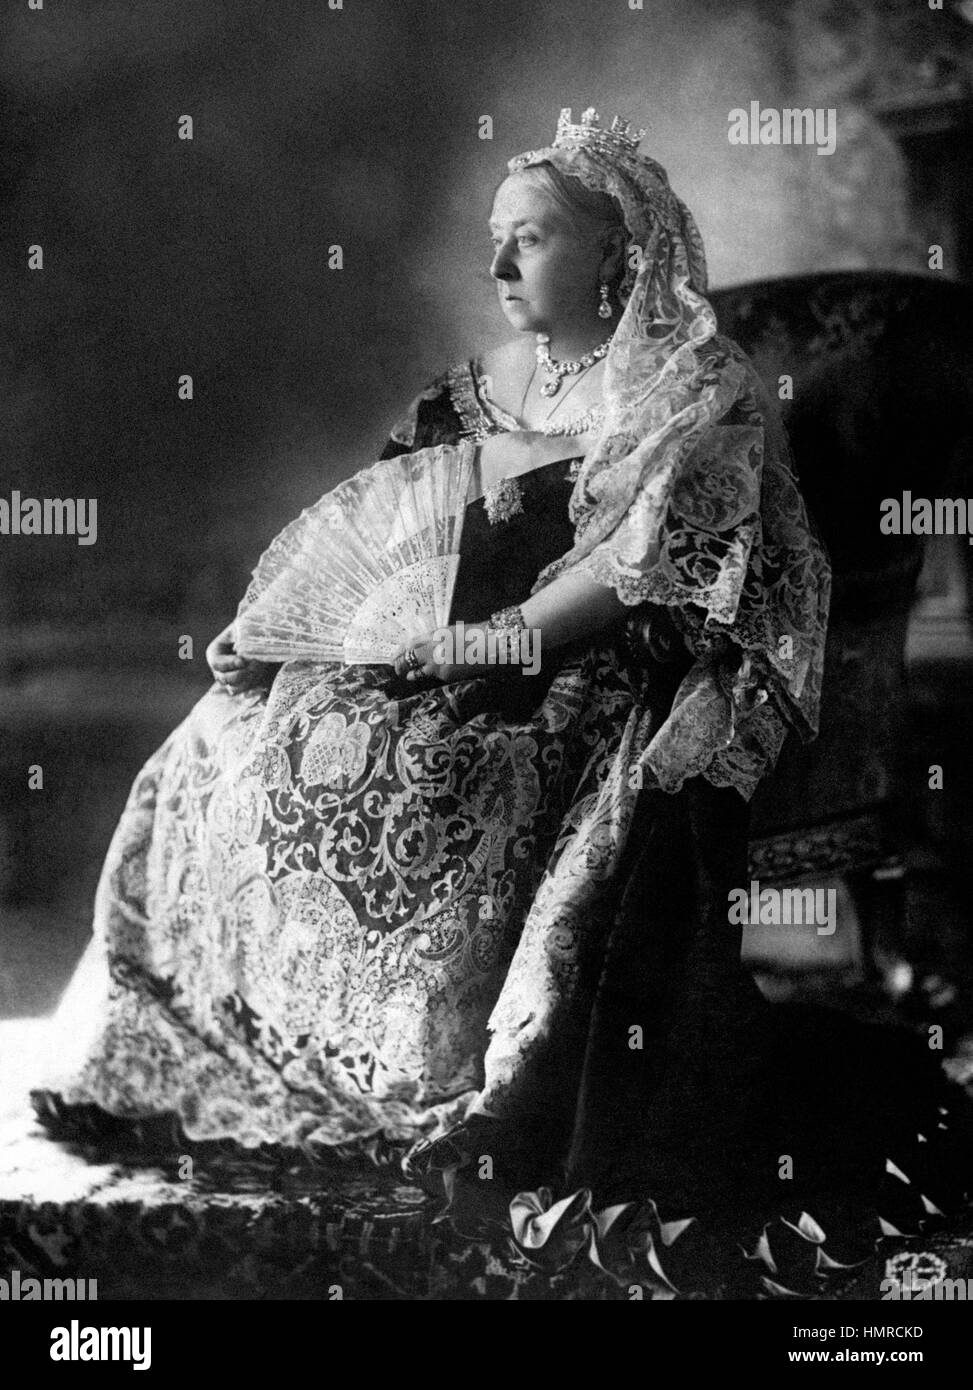 Undated file image of Queen Victoria's Diamond Jubilee photographic portrait. Queen Elizabeth II is to make history when she becomes the first British monarch to reach their Sapphire Jubilee on February 6. Stock Photo